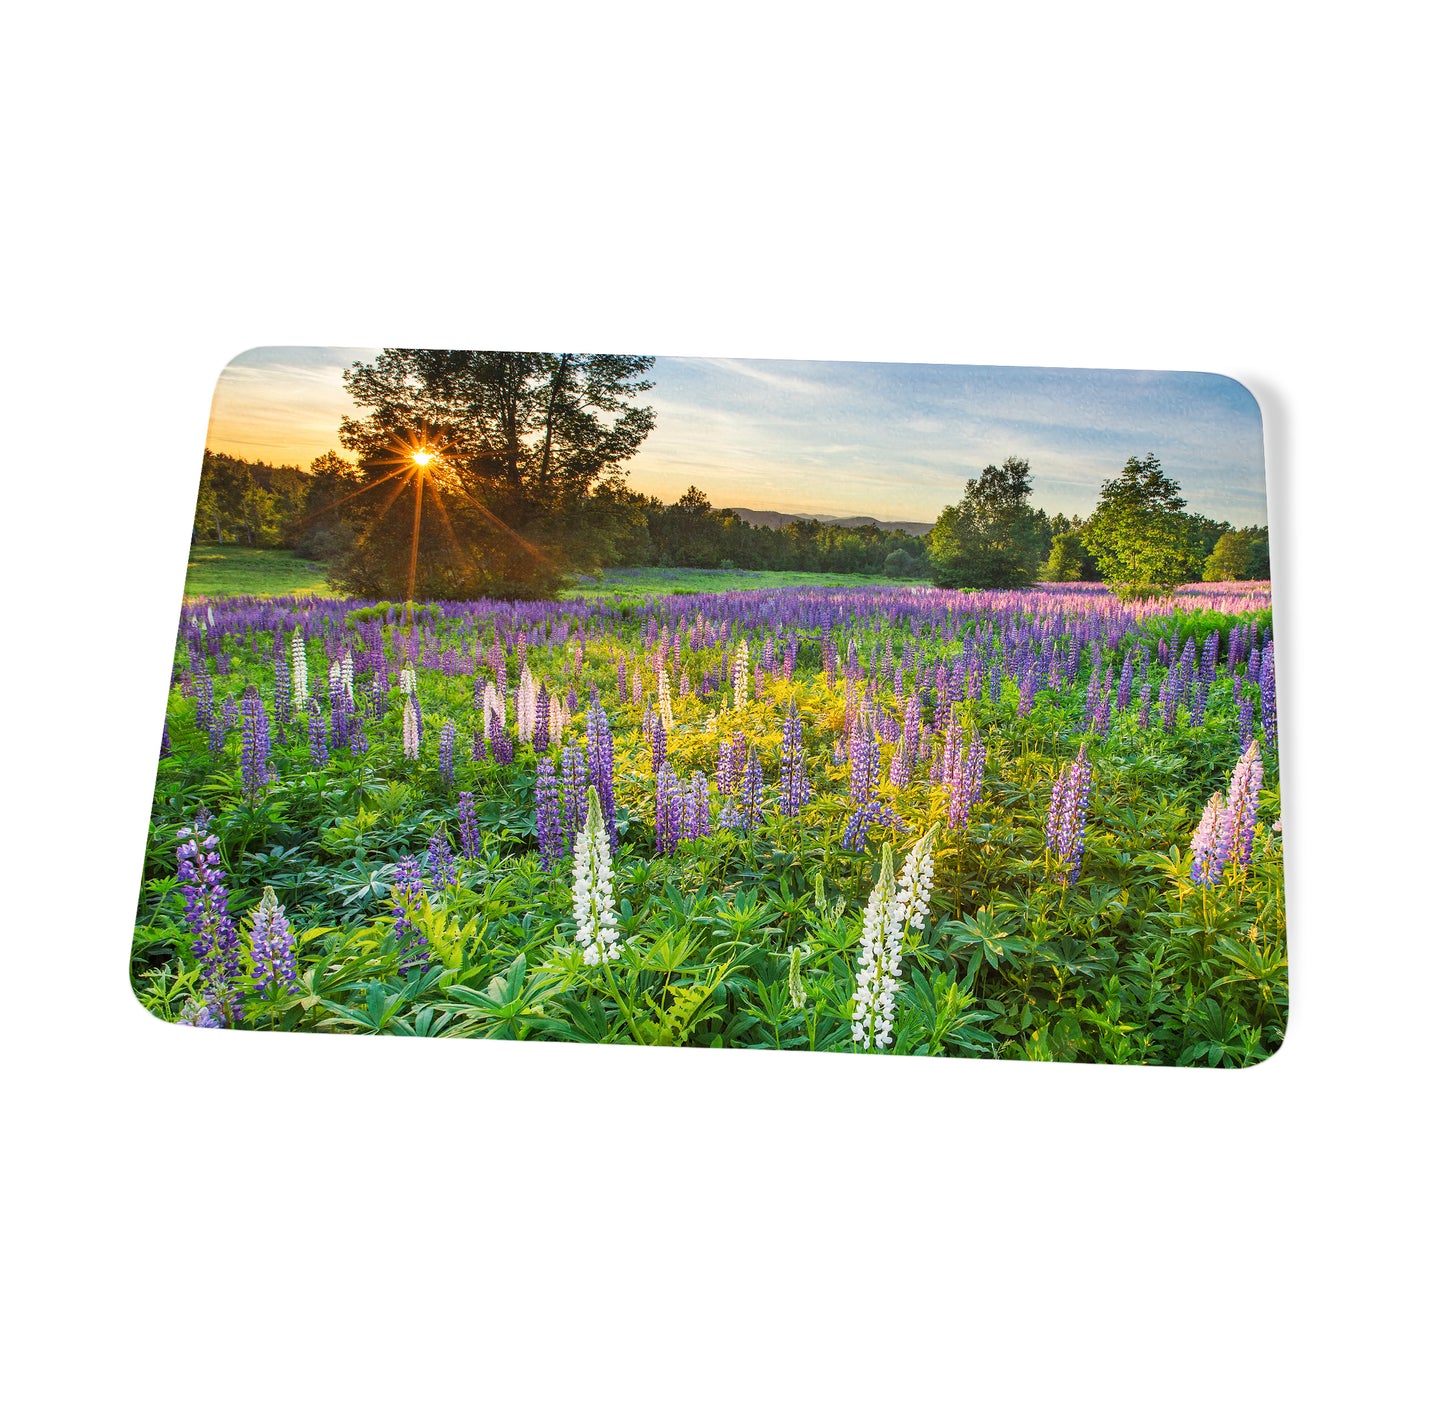 Lupine Field at Sunset Cutting Board by Chris Whiton